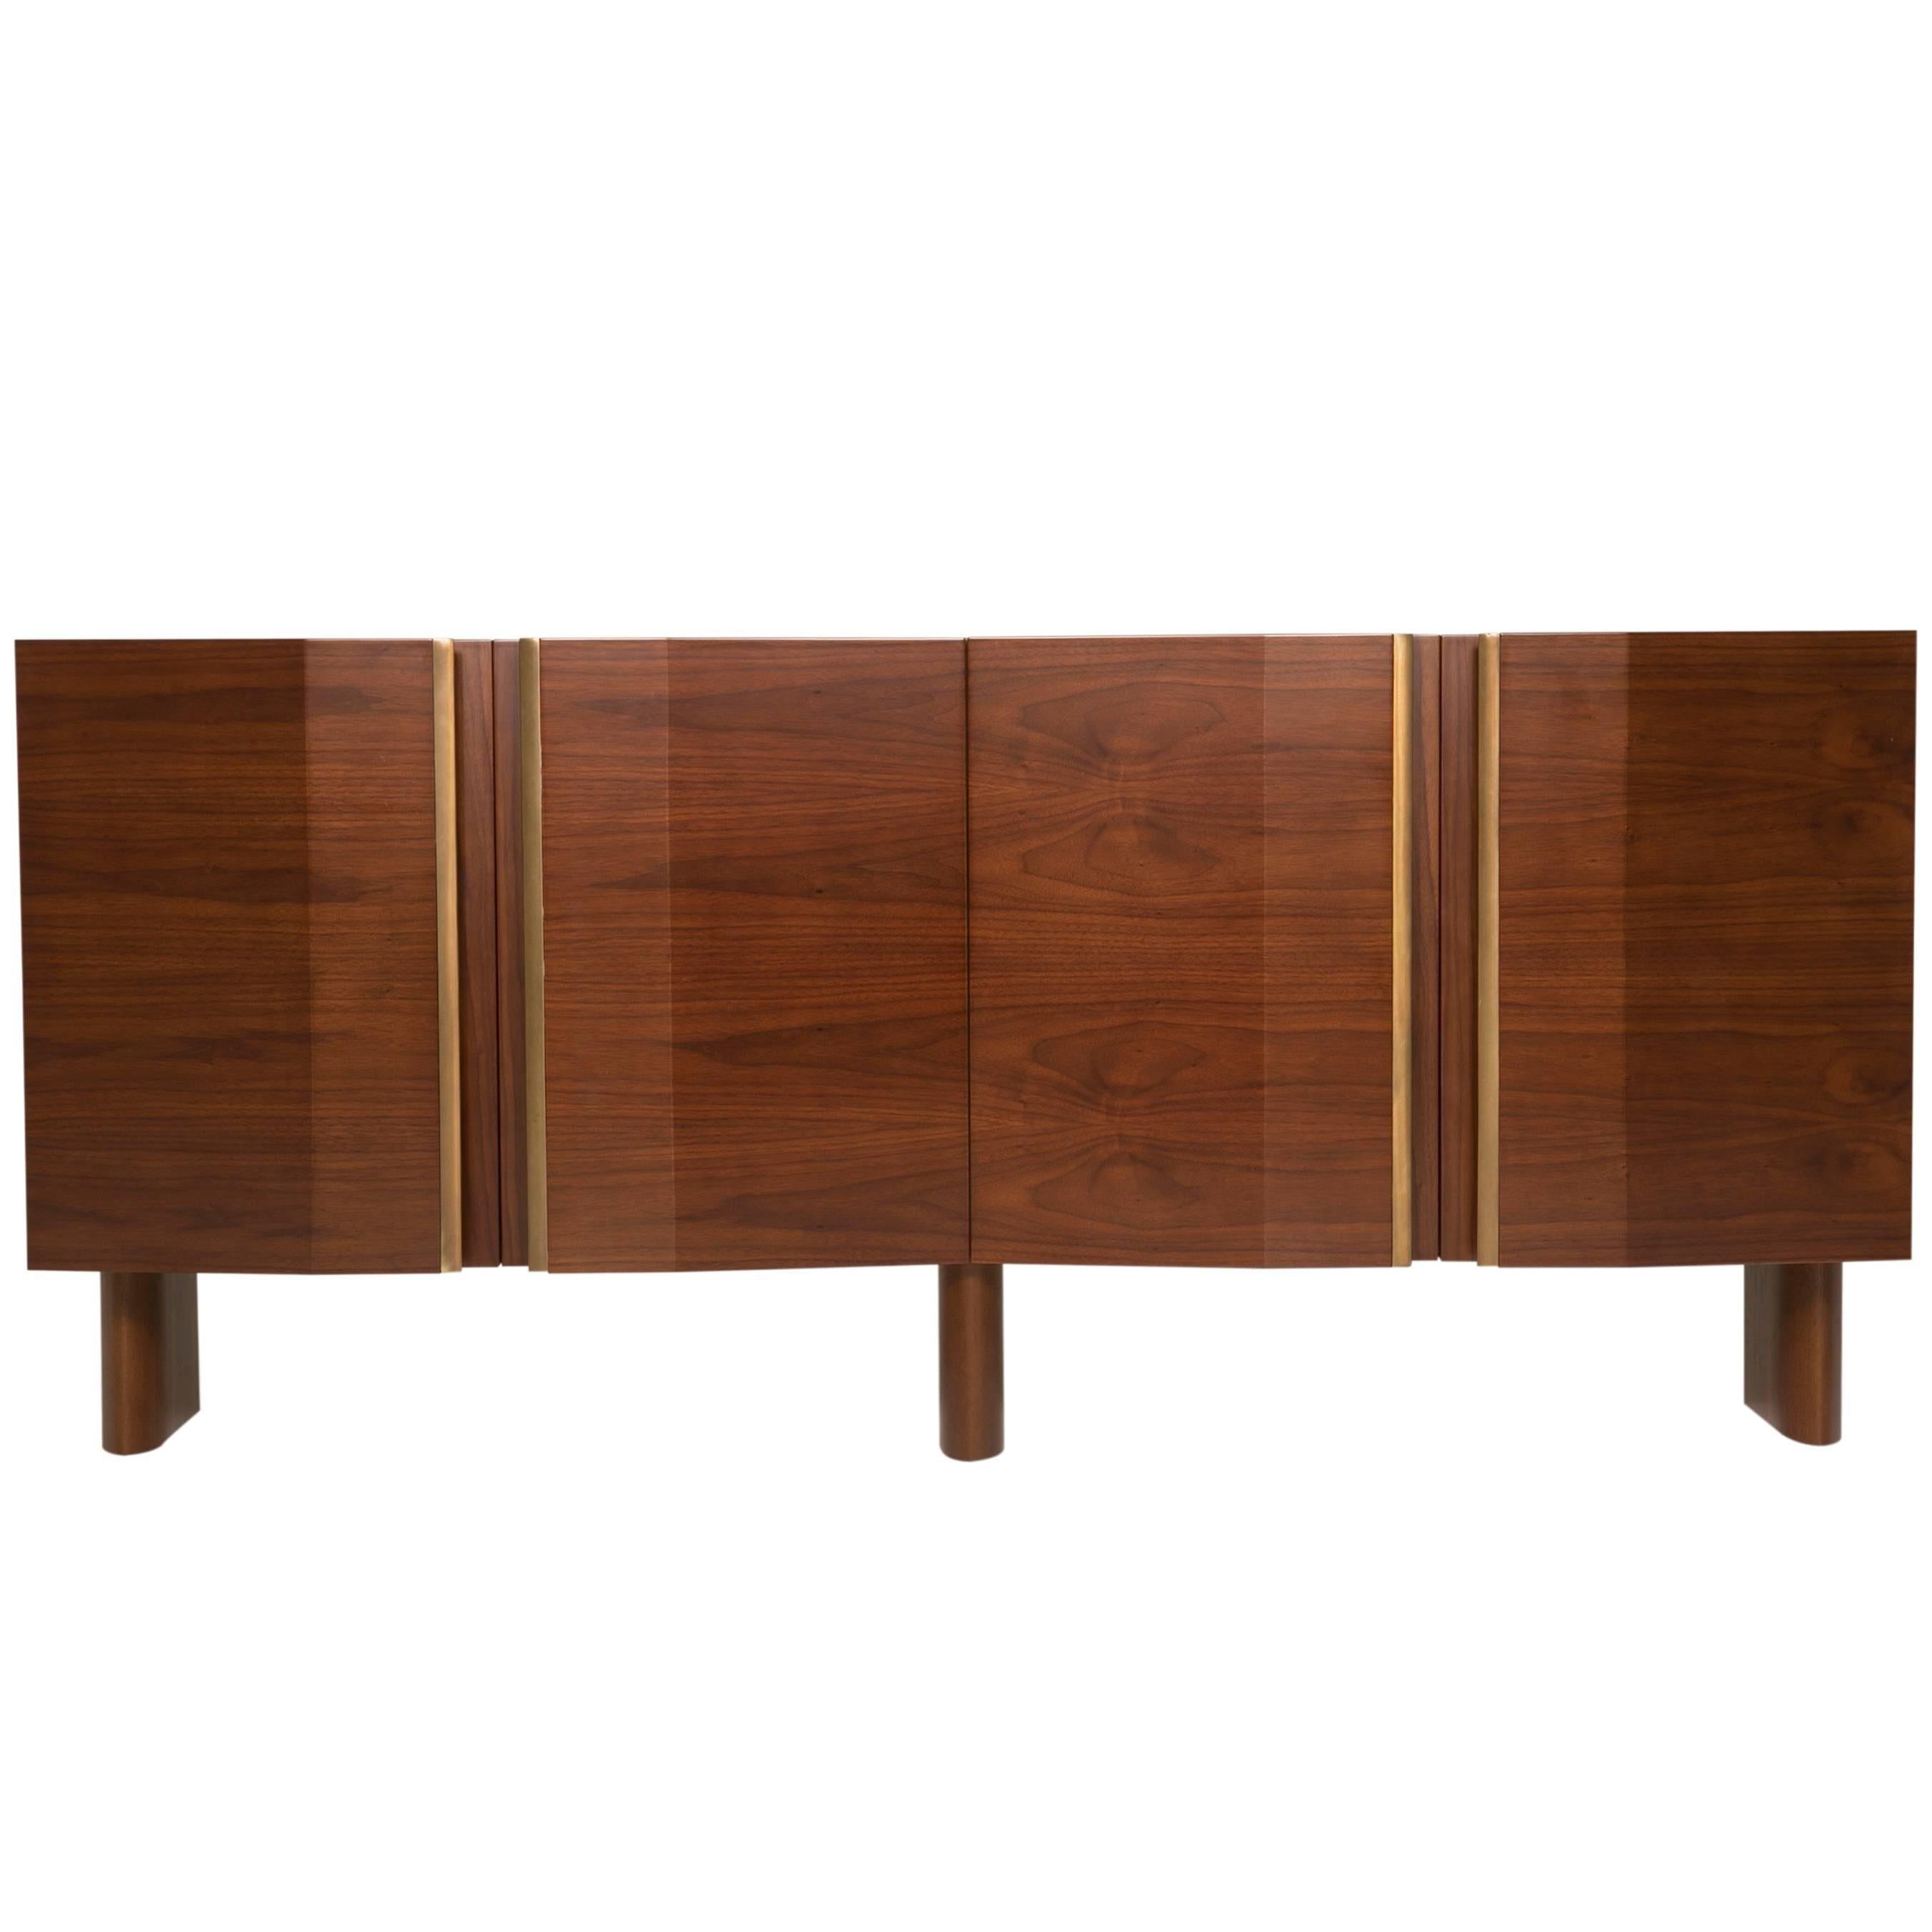 Contemporary Cognac Walnut and Brass Sideboard from France